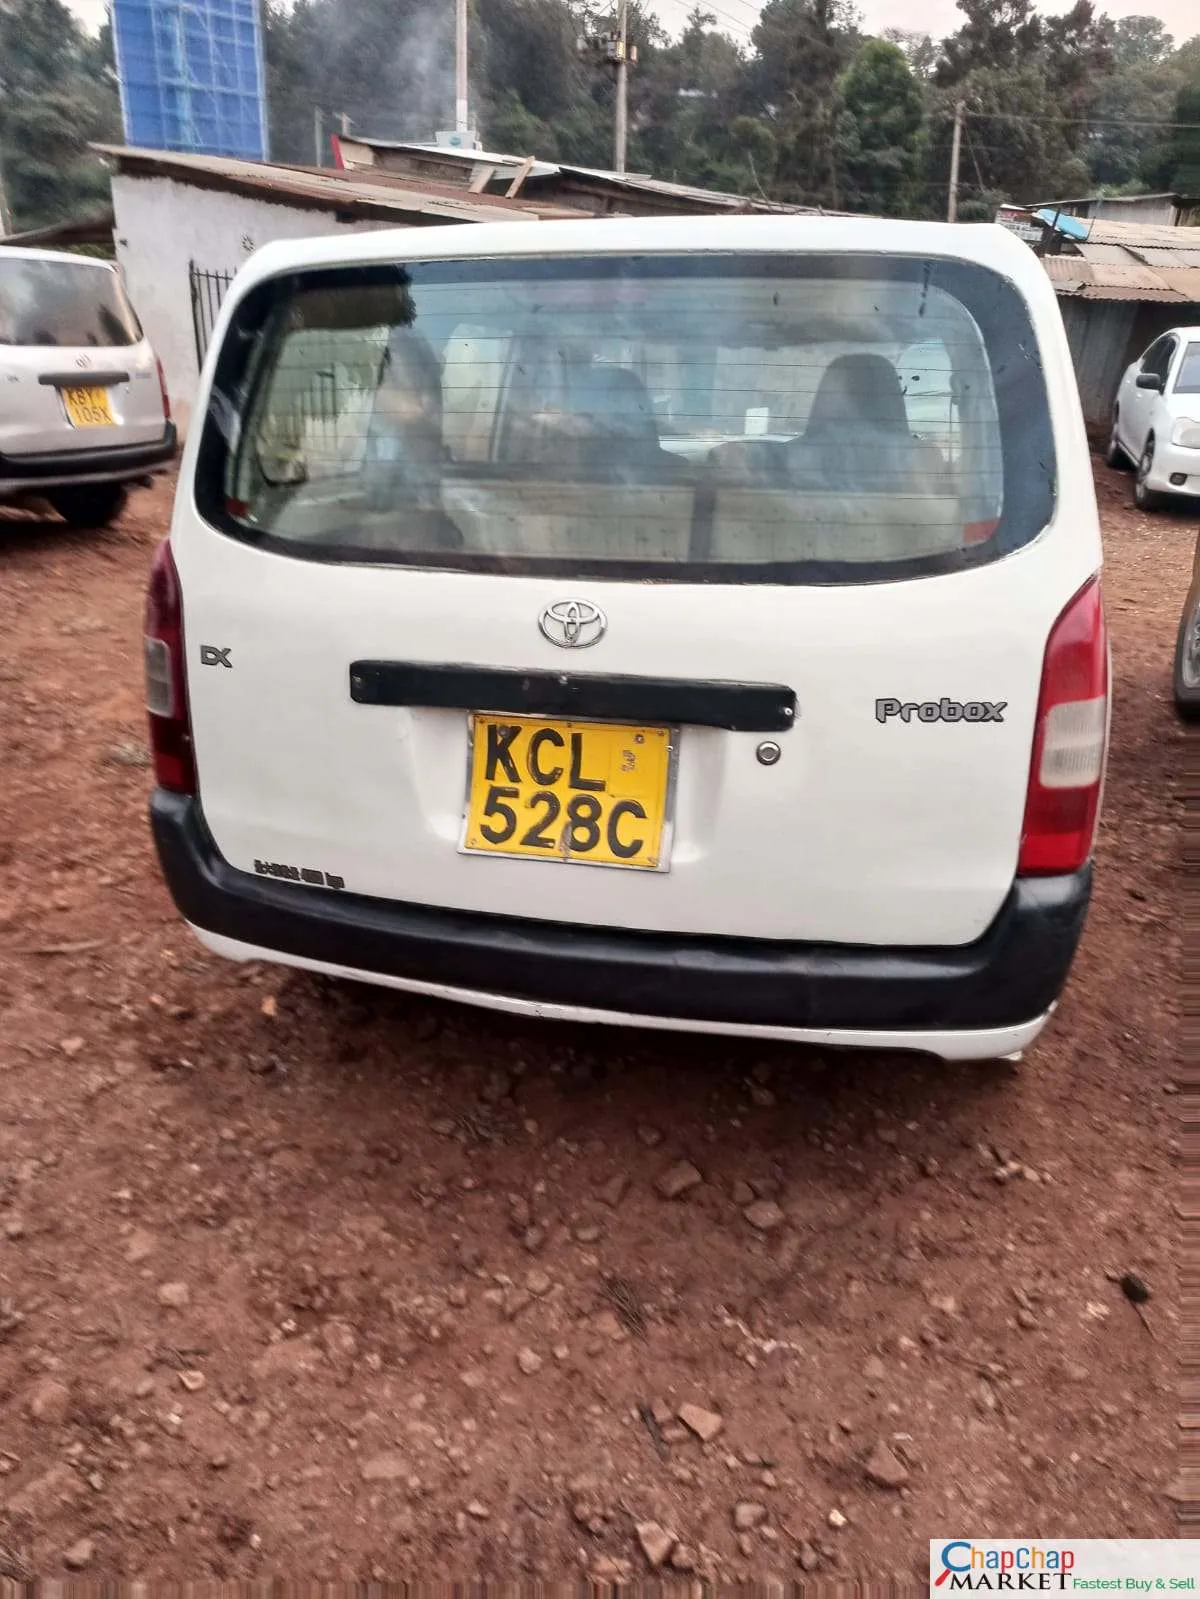 Toyota PROBOX for sale in Kenya QUICKEST SALE You Pay 30% Deposit Trade in OK EXCLUSIVE Hire Purchase Installments bank finance